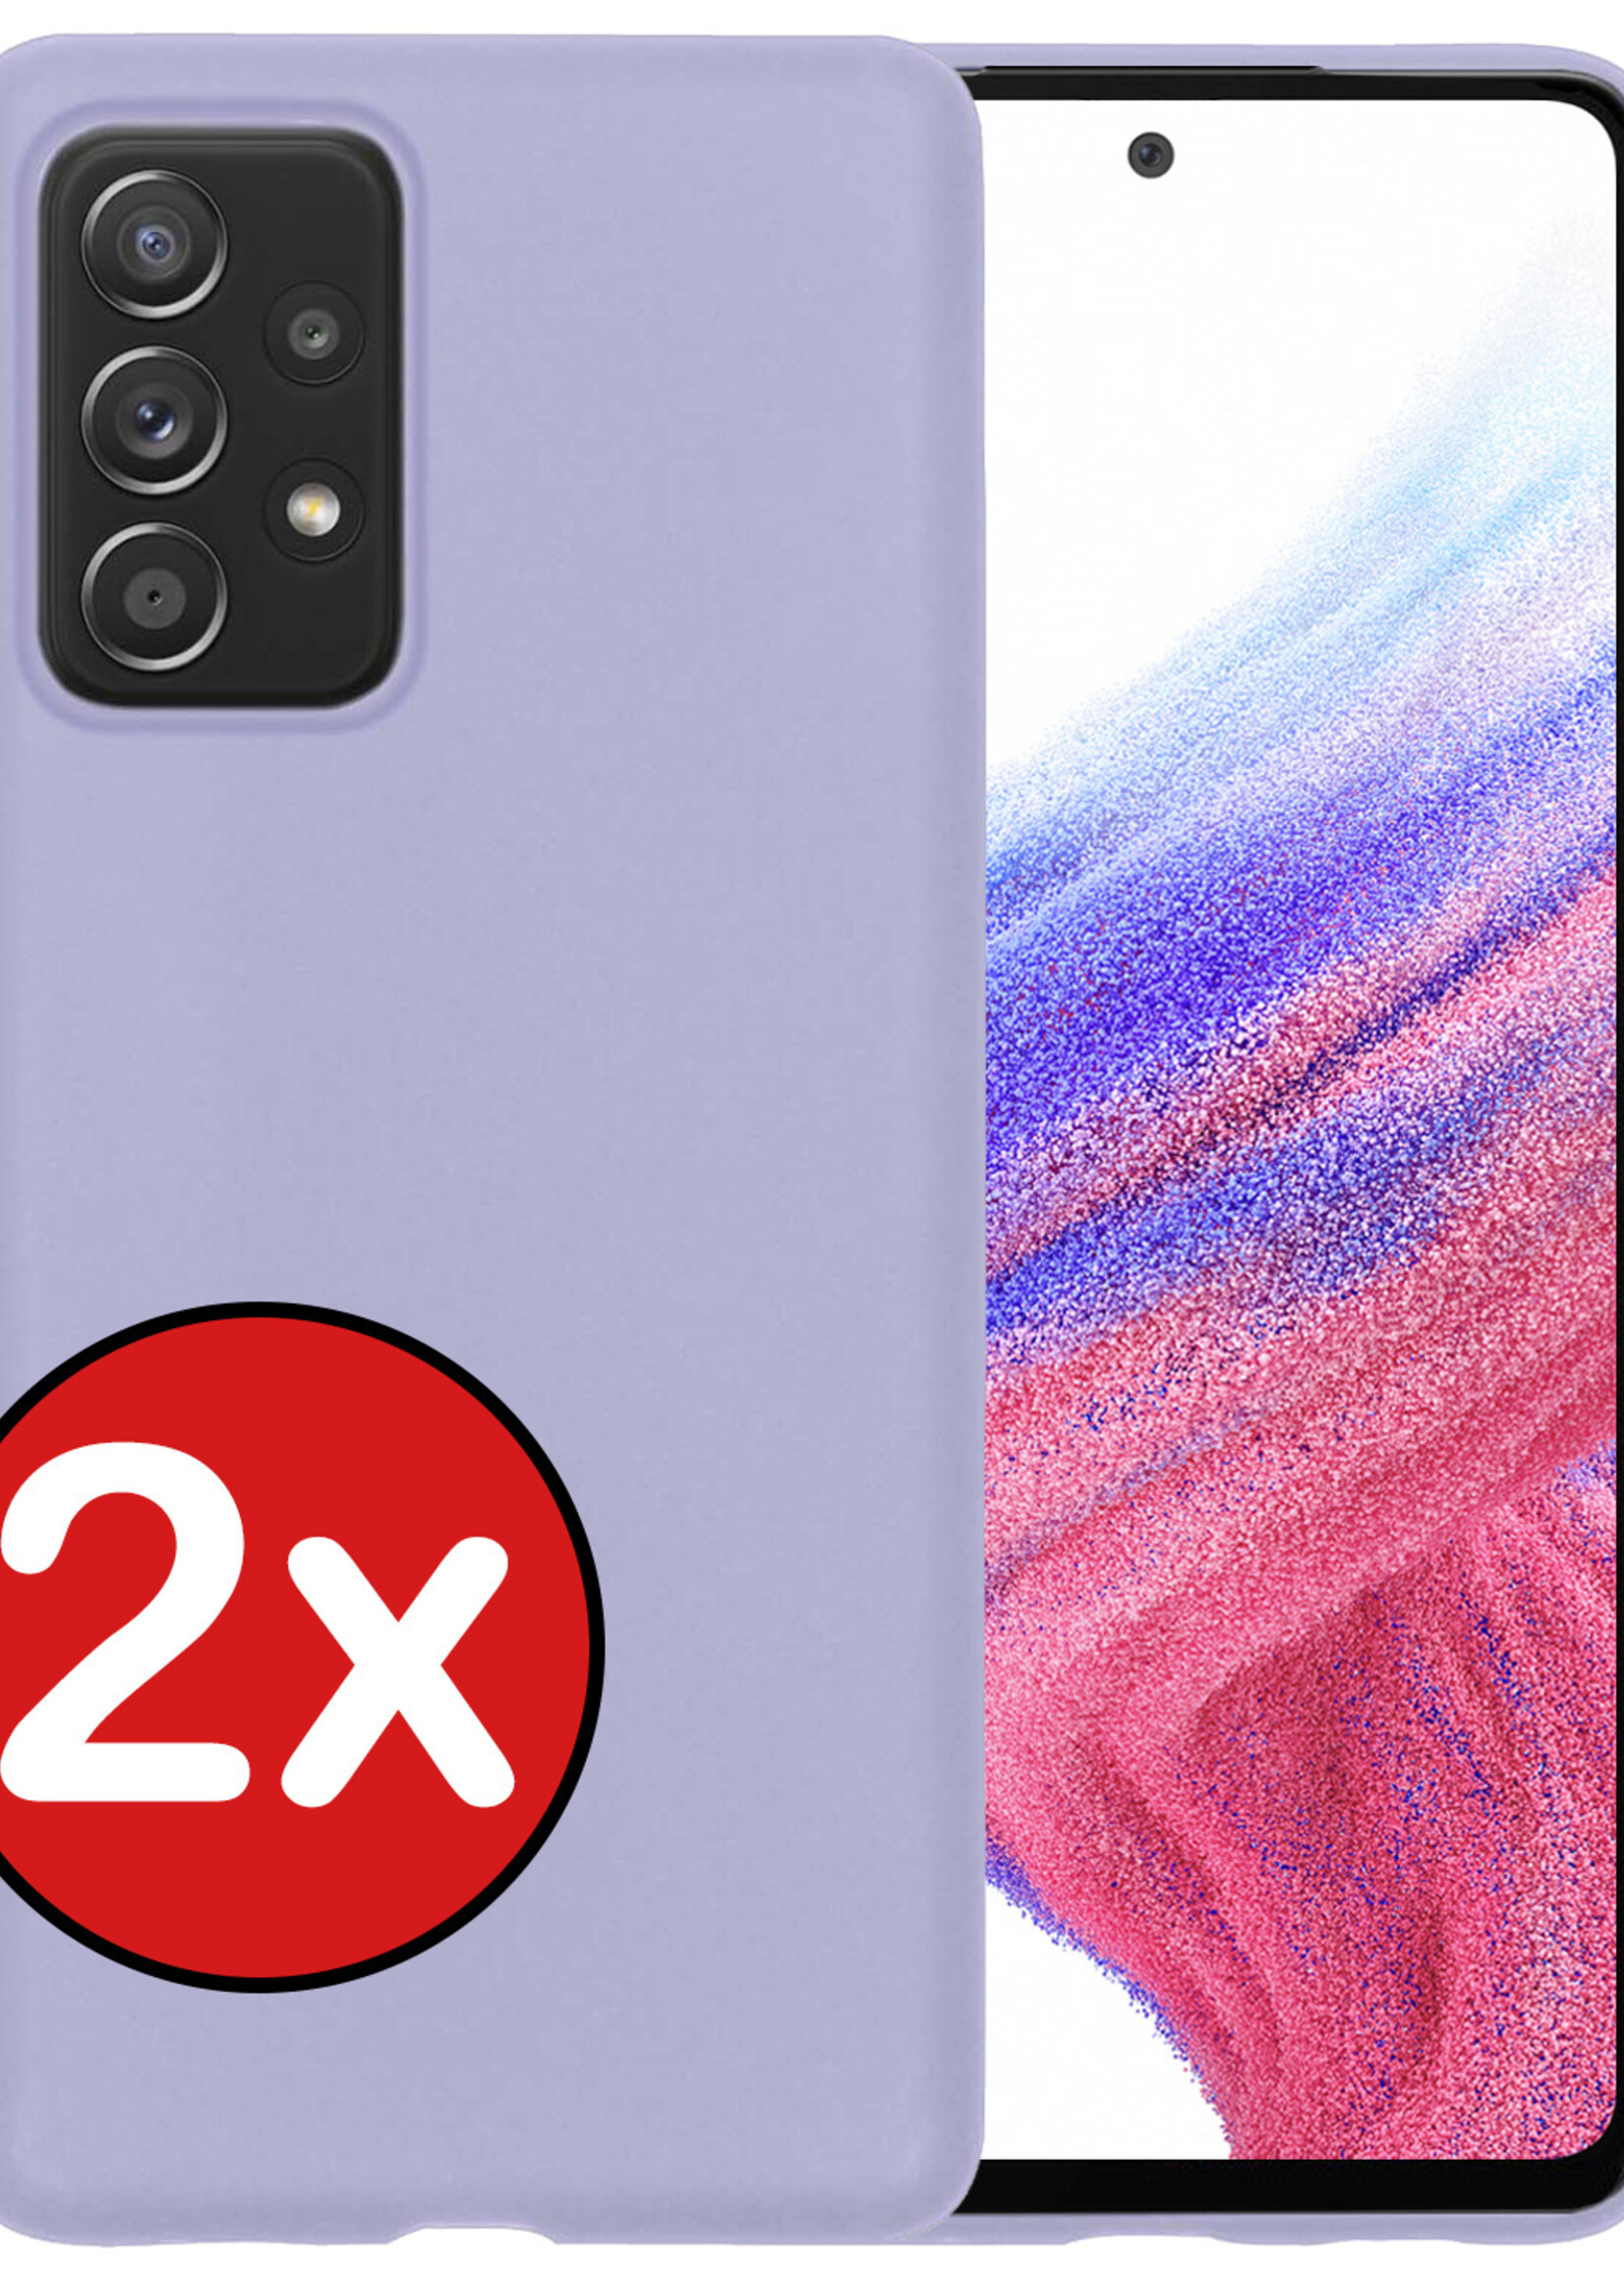 BTH Hoesje Geschikt voor Samsung A53 Hoesje Siliconen Case Hoes - Hoes Geschikt voor Samsung Galaxy A53 Hoes Cover Case - Lila - 2 PACK